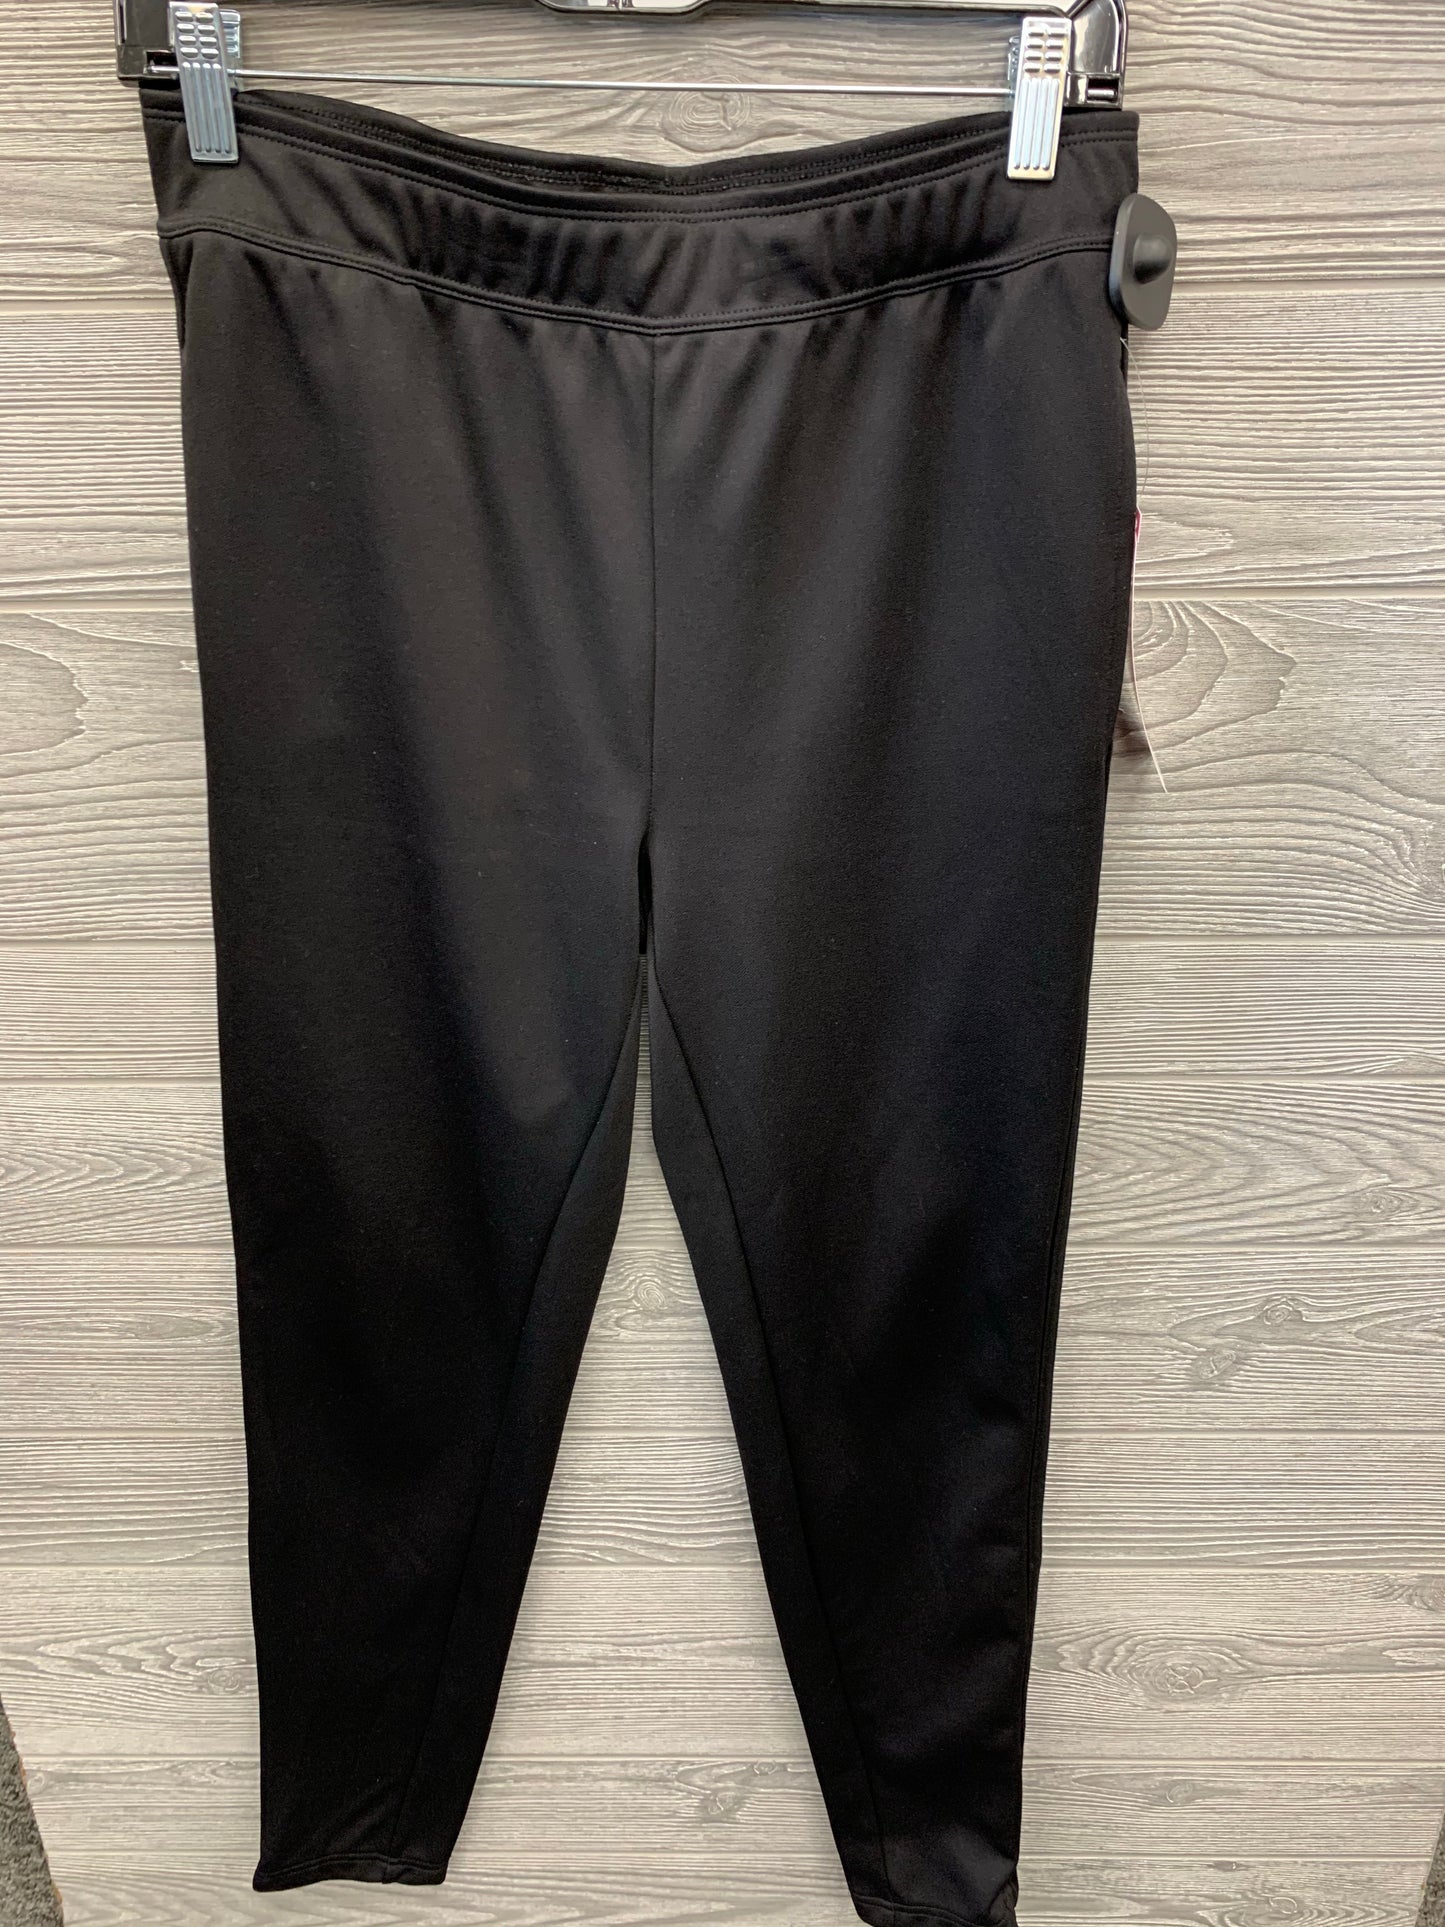 ACTIVEWEAR BOTTOMS SIZE S